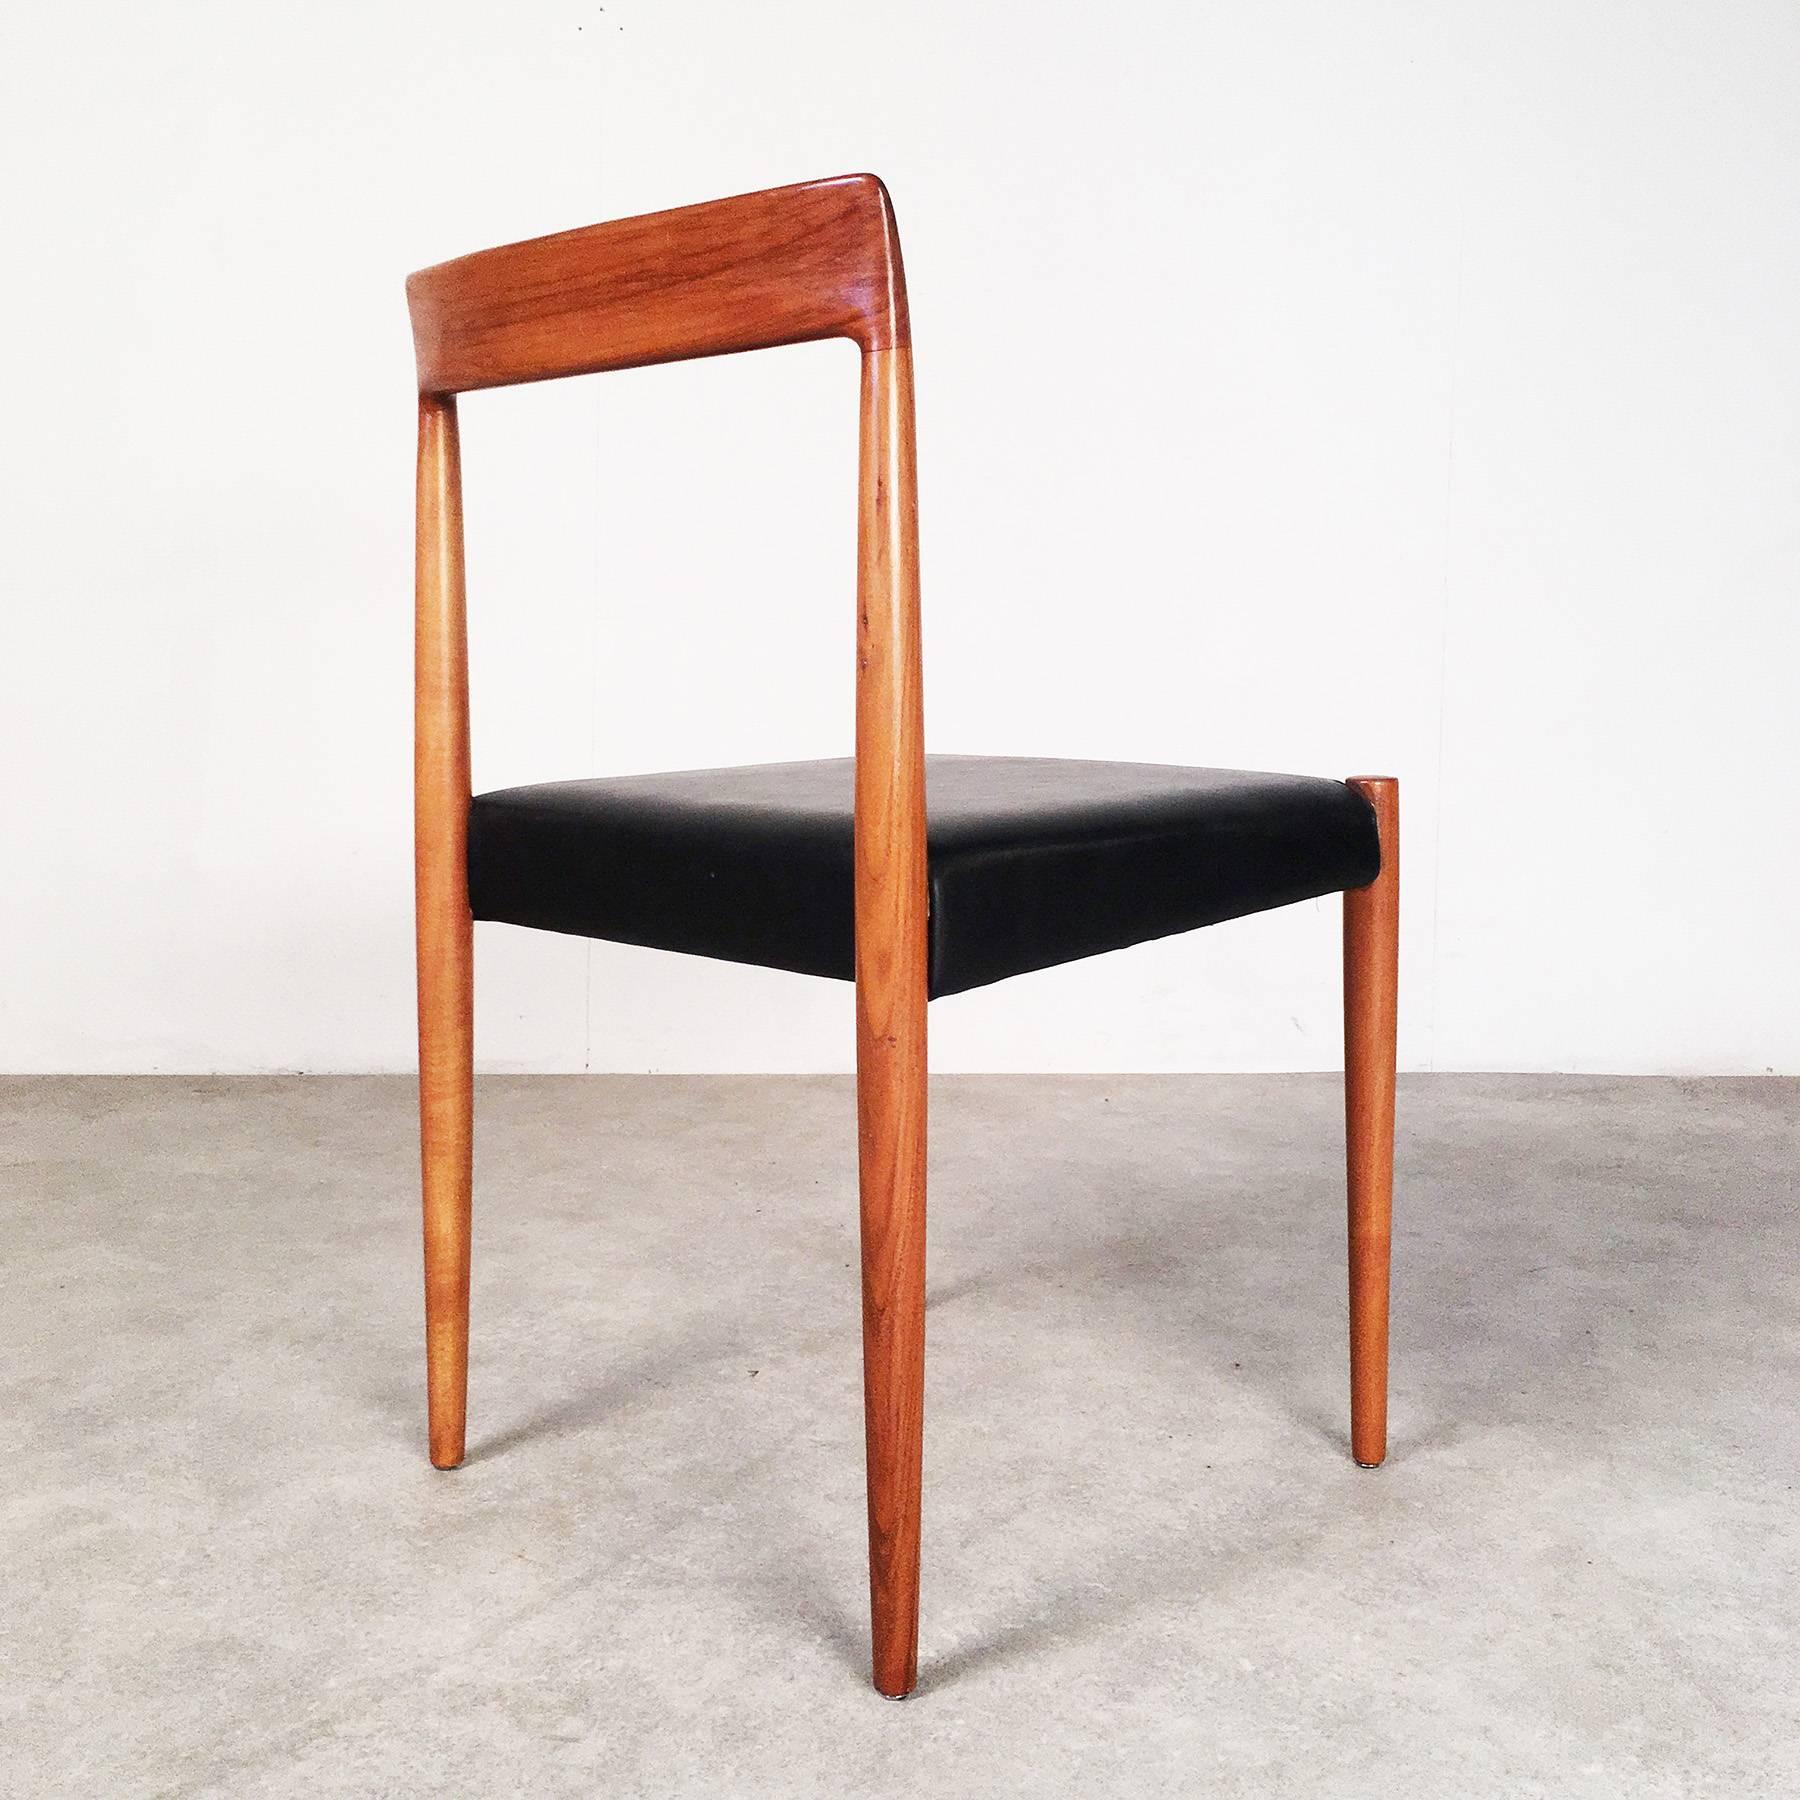 German Six Dining Chairs from the 1960s, Manufactured by Lübke